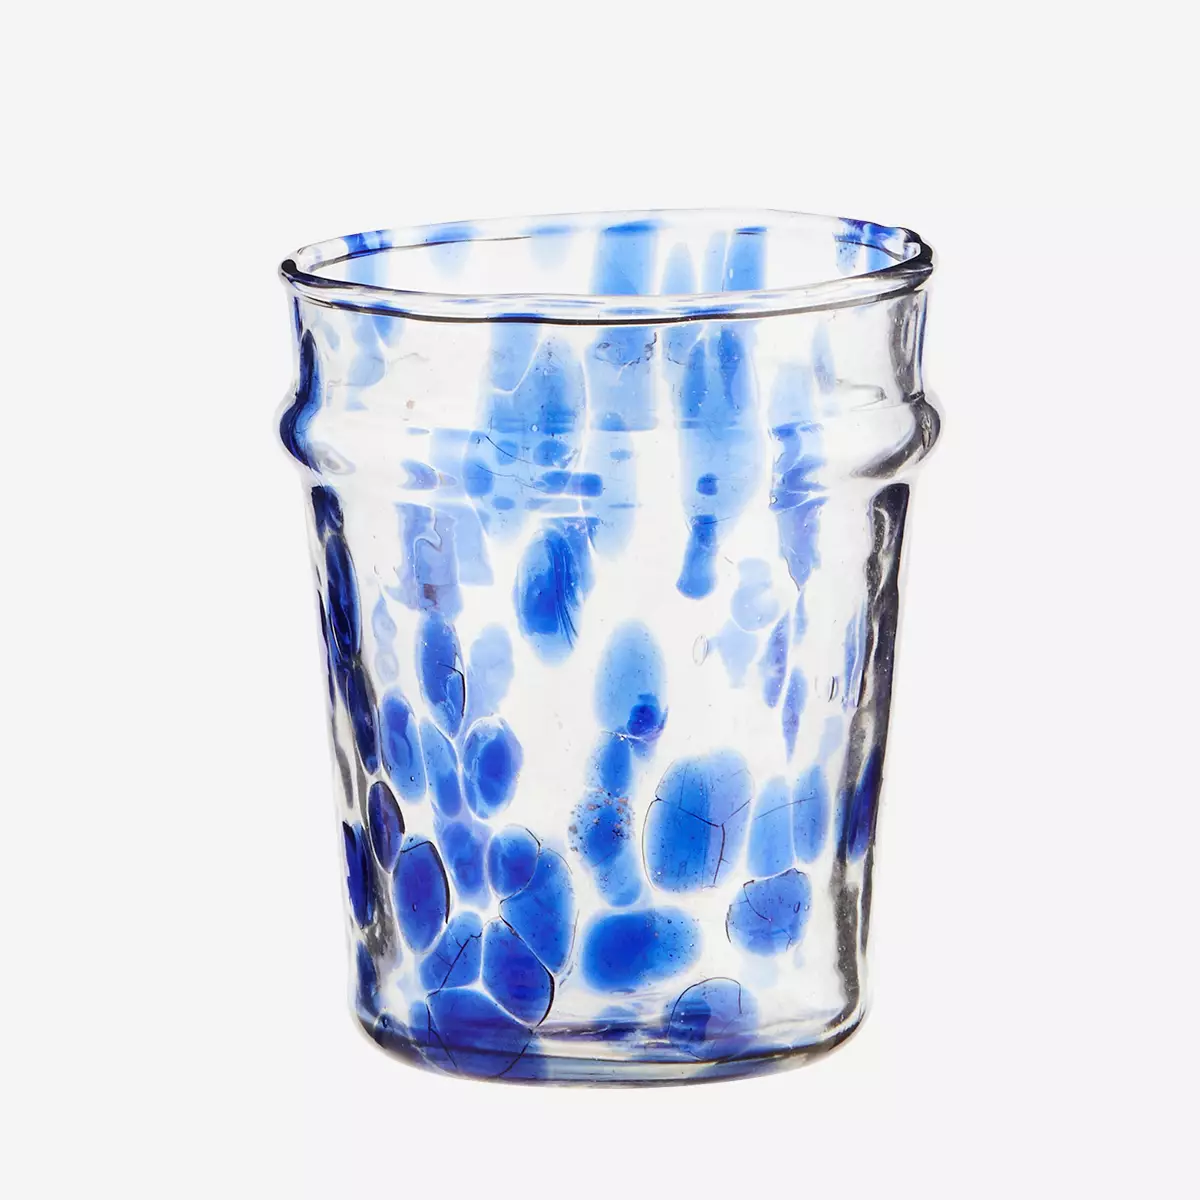 Drinking glass blue/clear